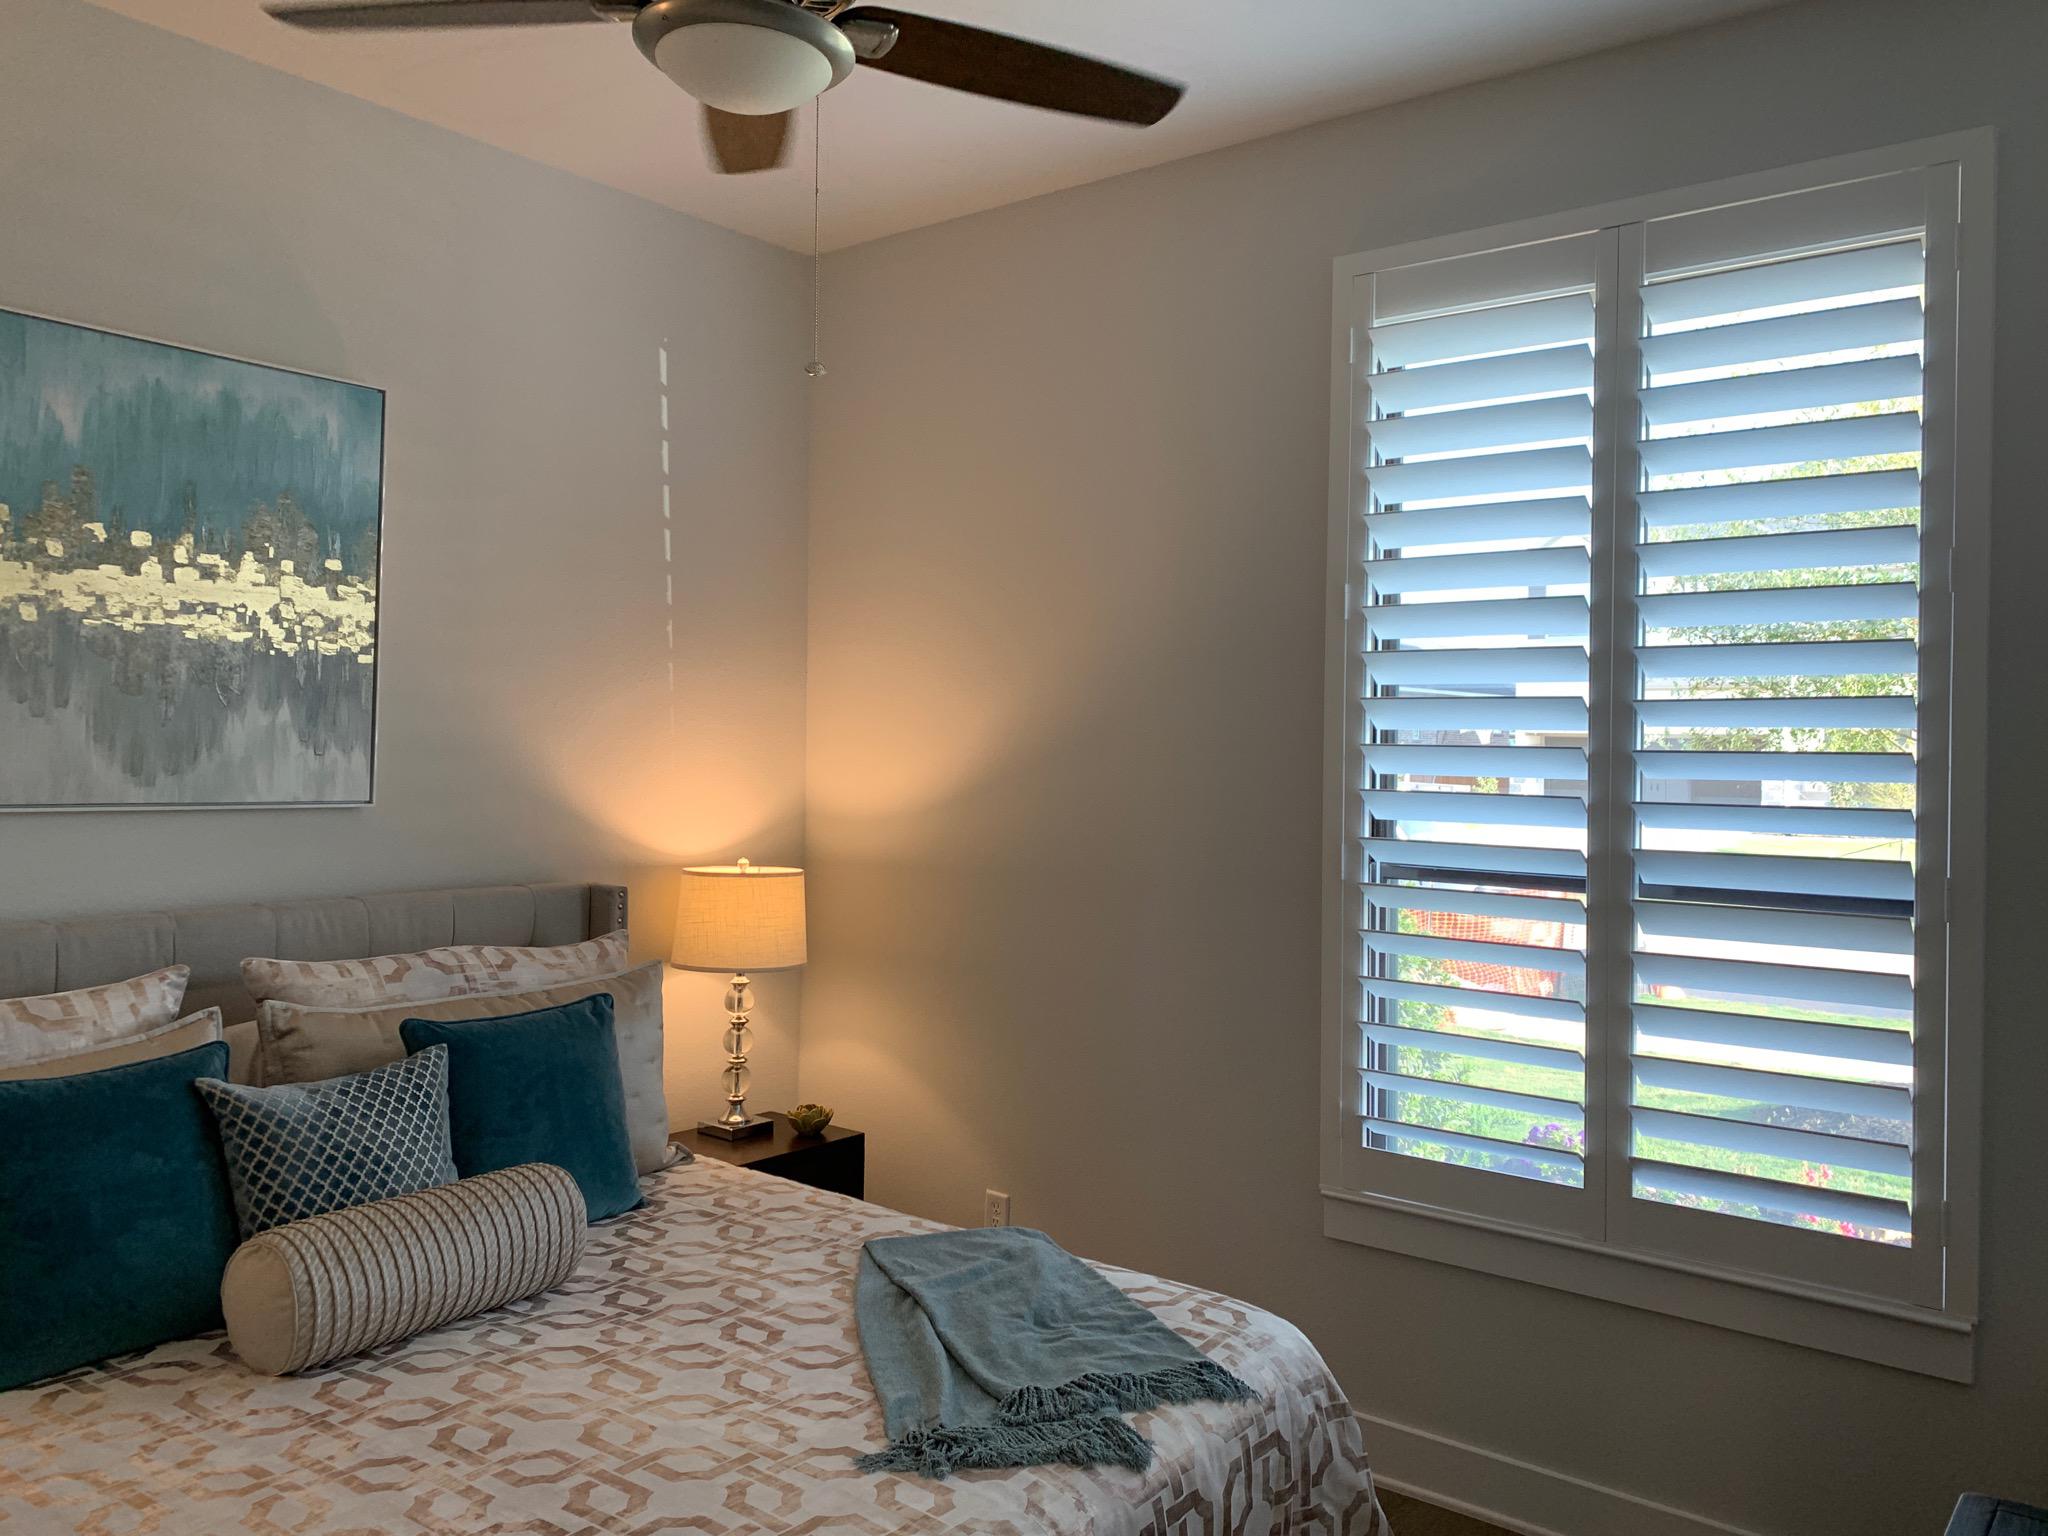 Think Shutters are only for old-fashioned homes? This Katy home would prove you wrong! Here, we’ve got a great contemporary design that features our Plantation Shutters!